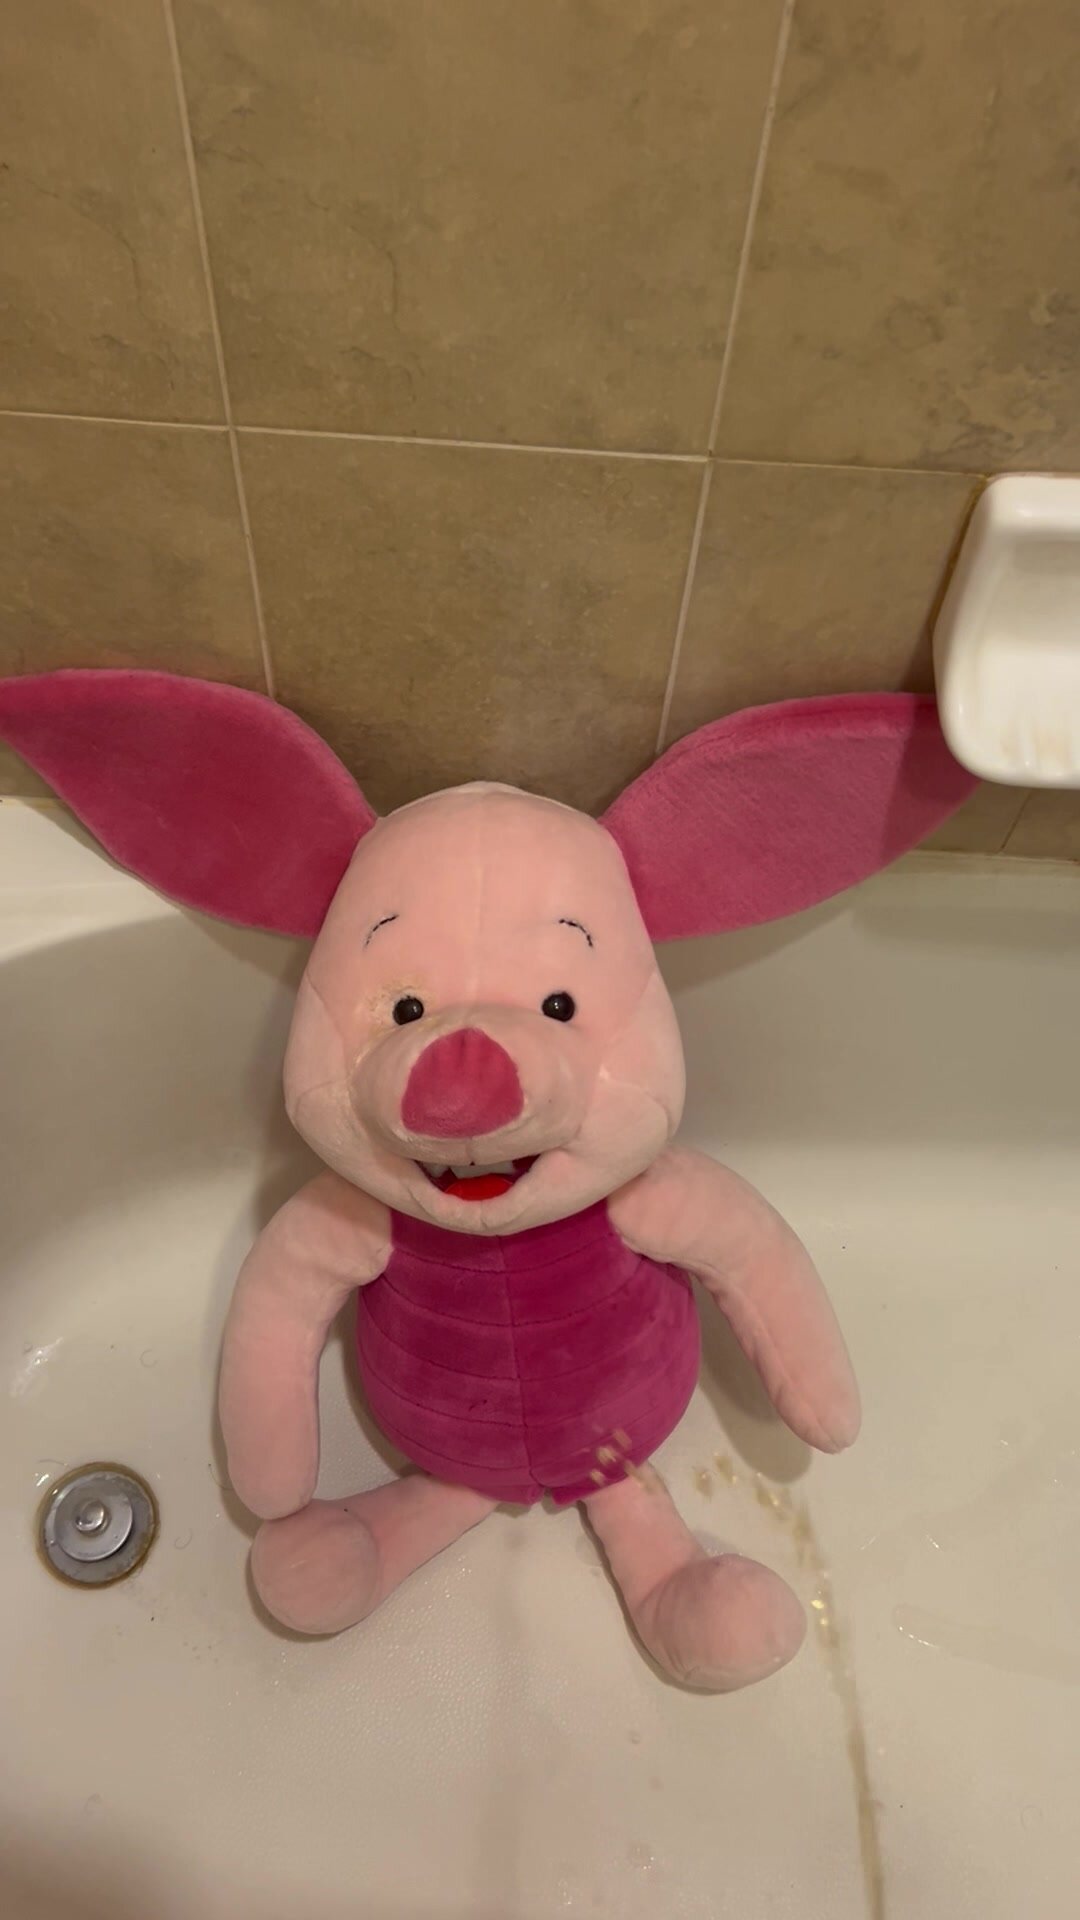 Large Piglet Plush Gets A Face Full of Piss!